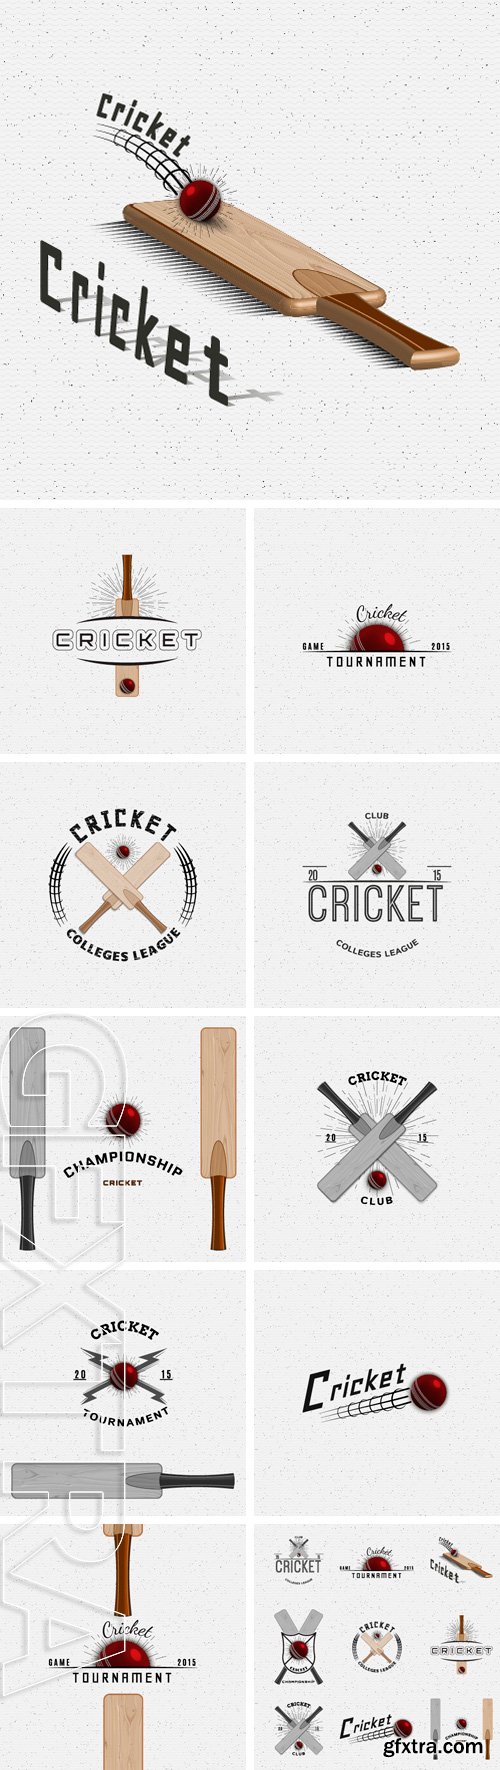 Stock Vectors - Cricket badges logos and labels can be used for design, presentations, brochures, flyers, sports equipment, corporate identity, sales